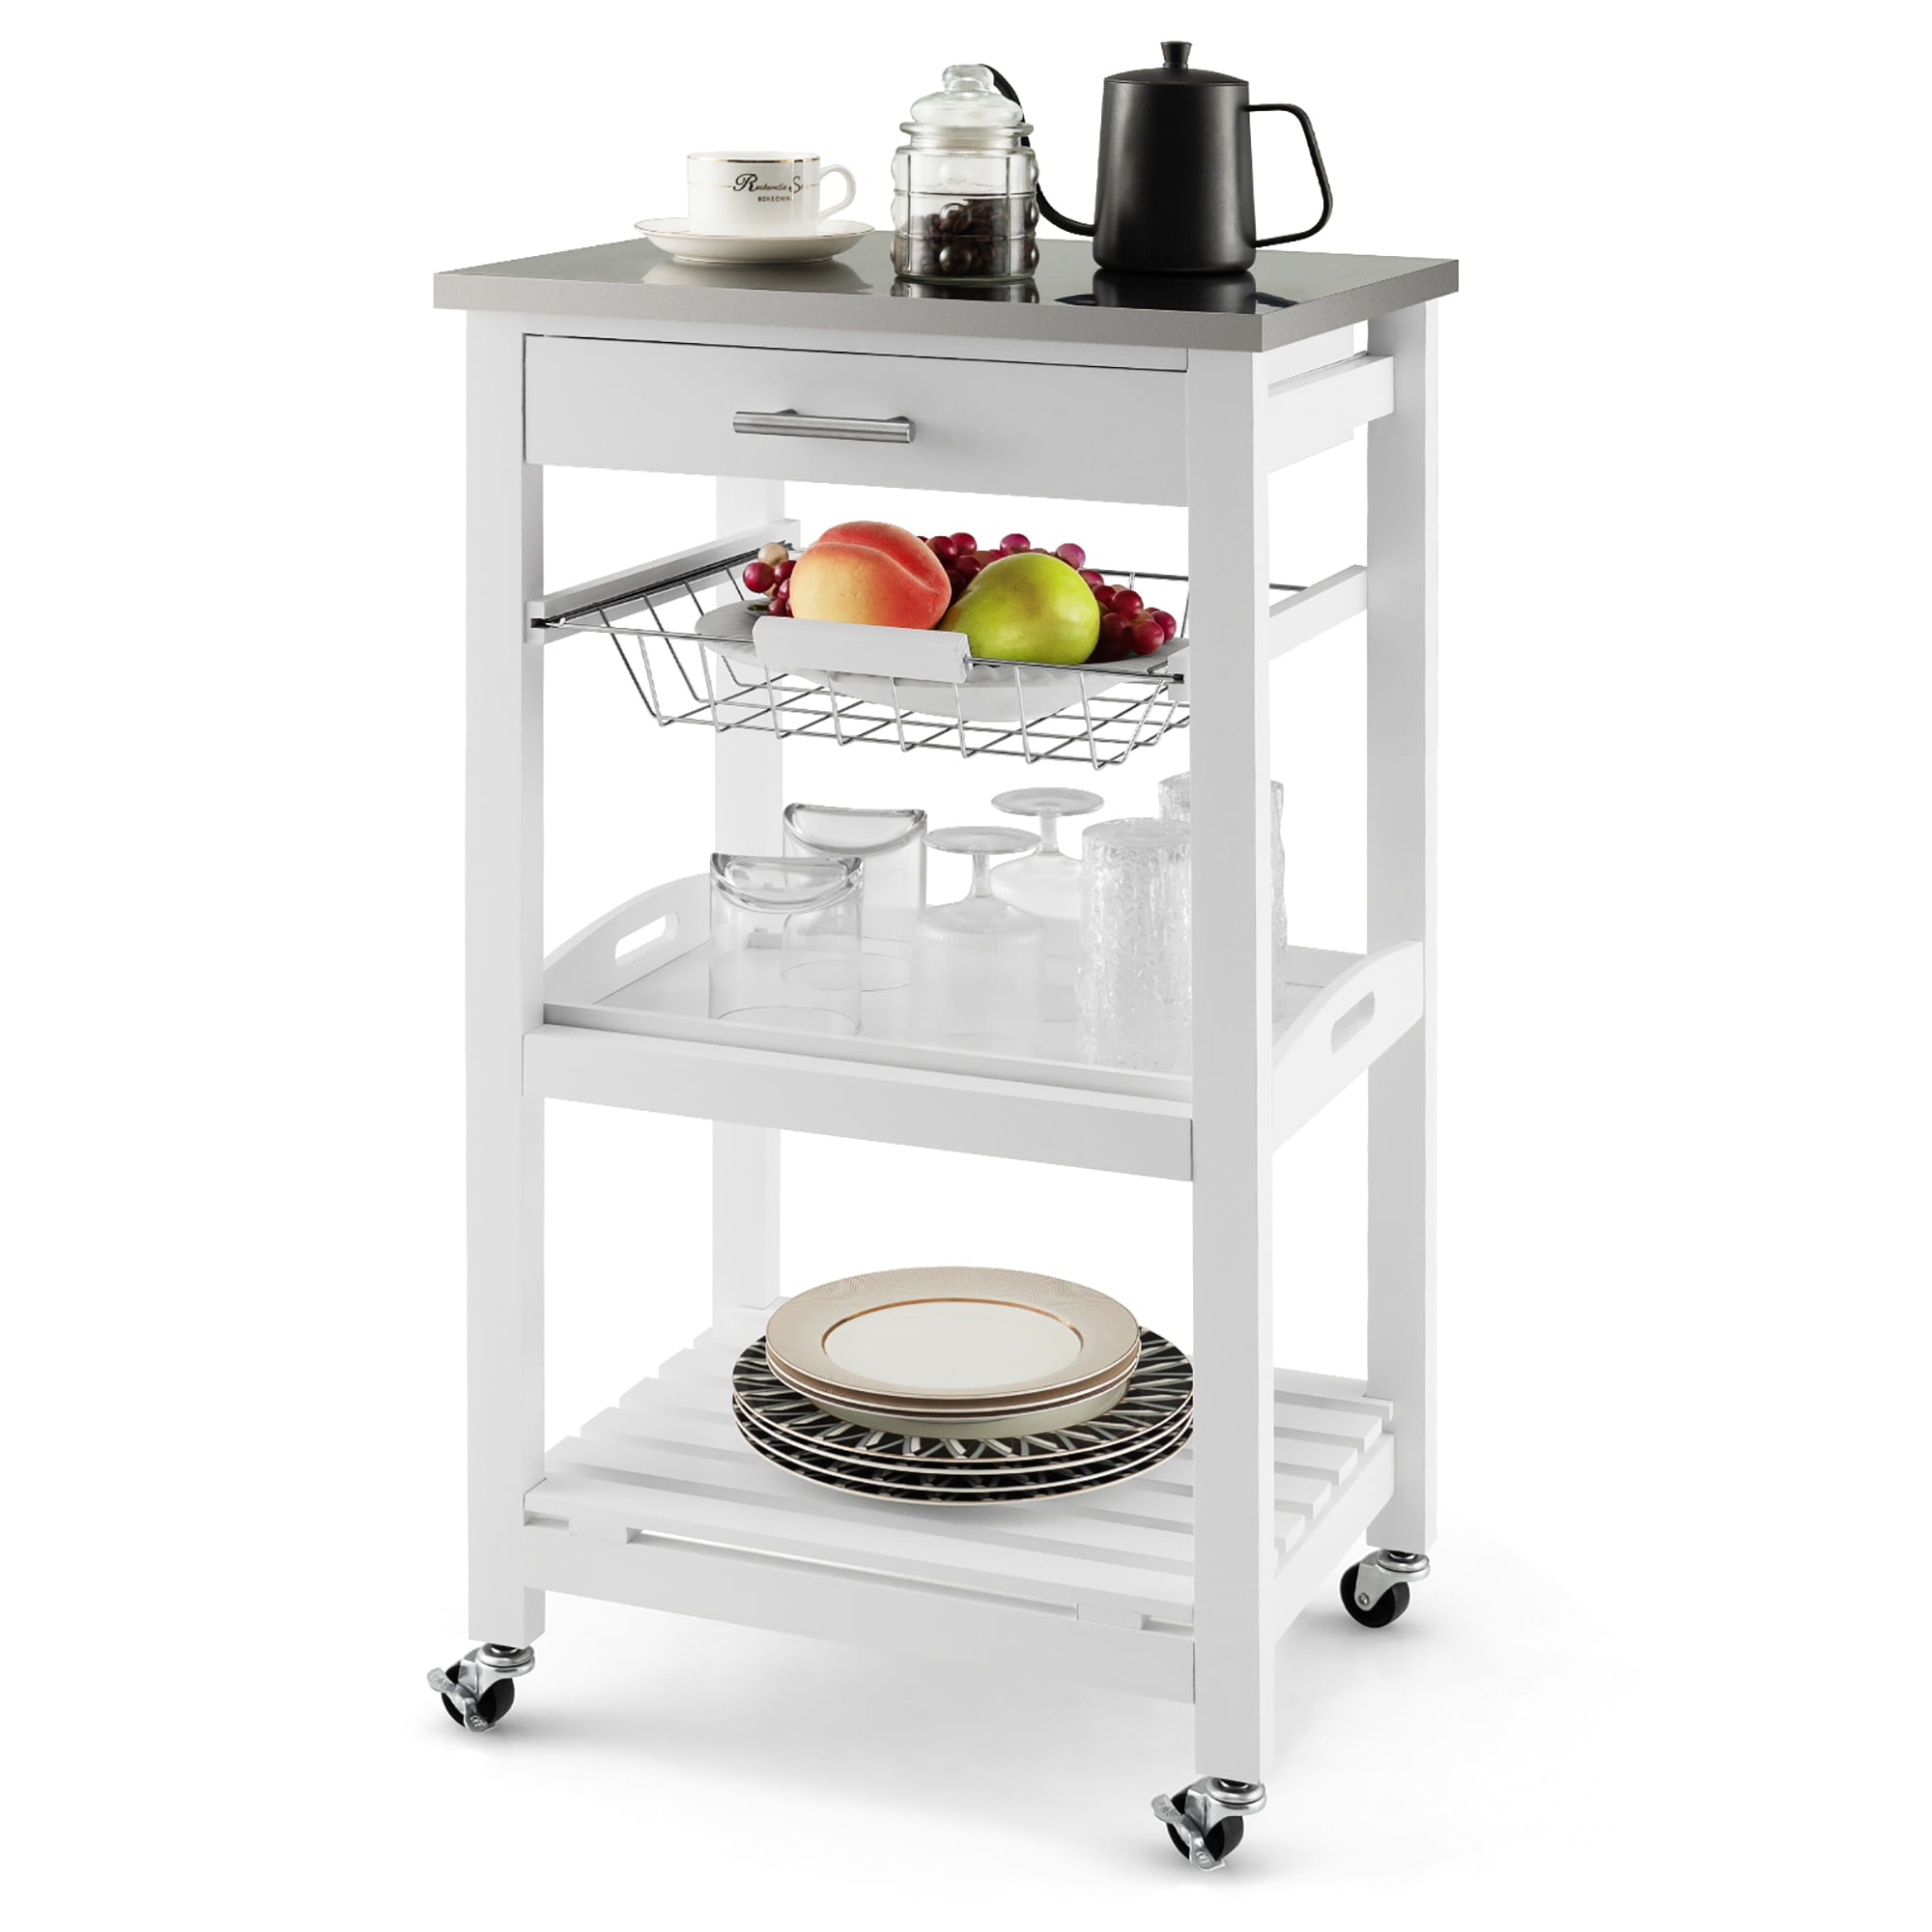 Costway Compact Kitchen Island Cart Rolling Service Trolley withStainless Steel Top Basket